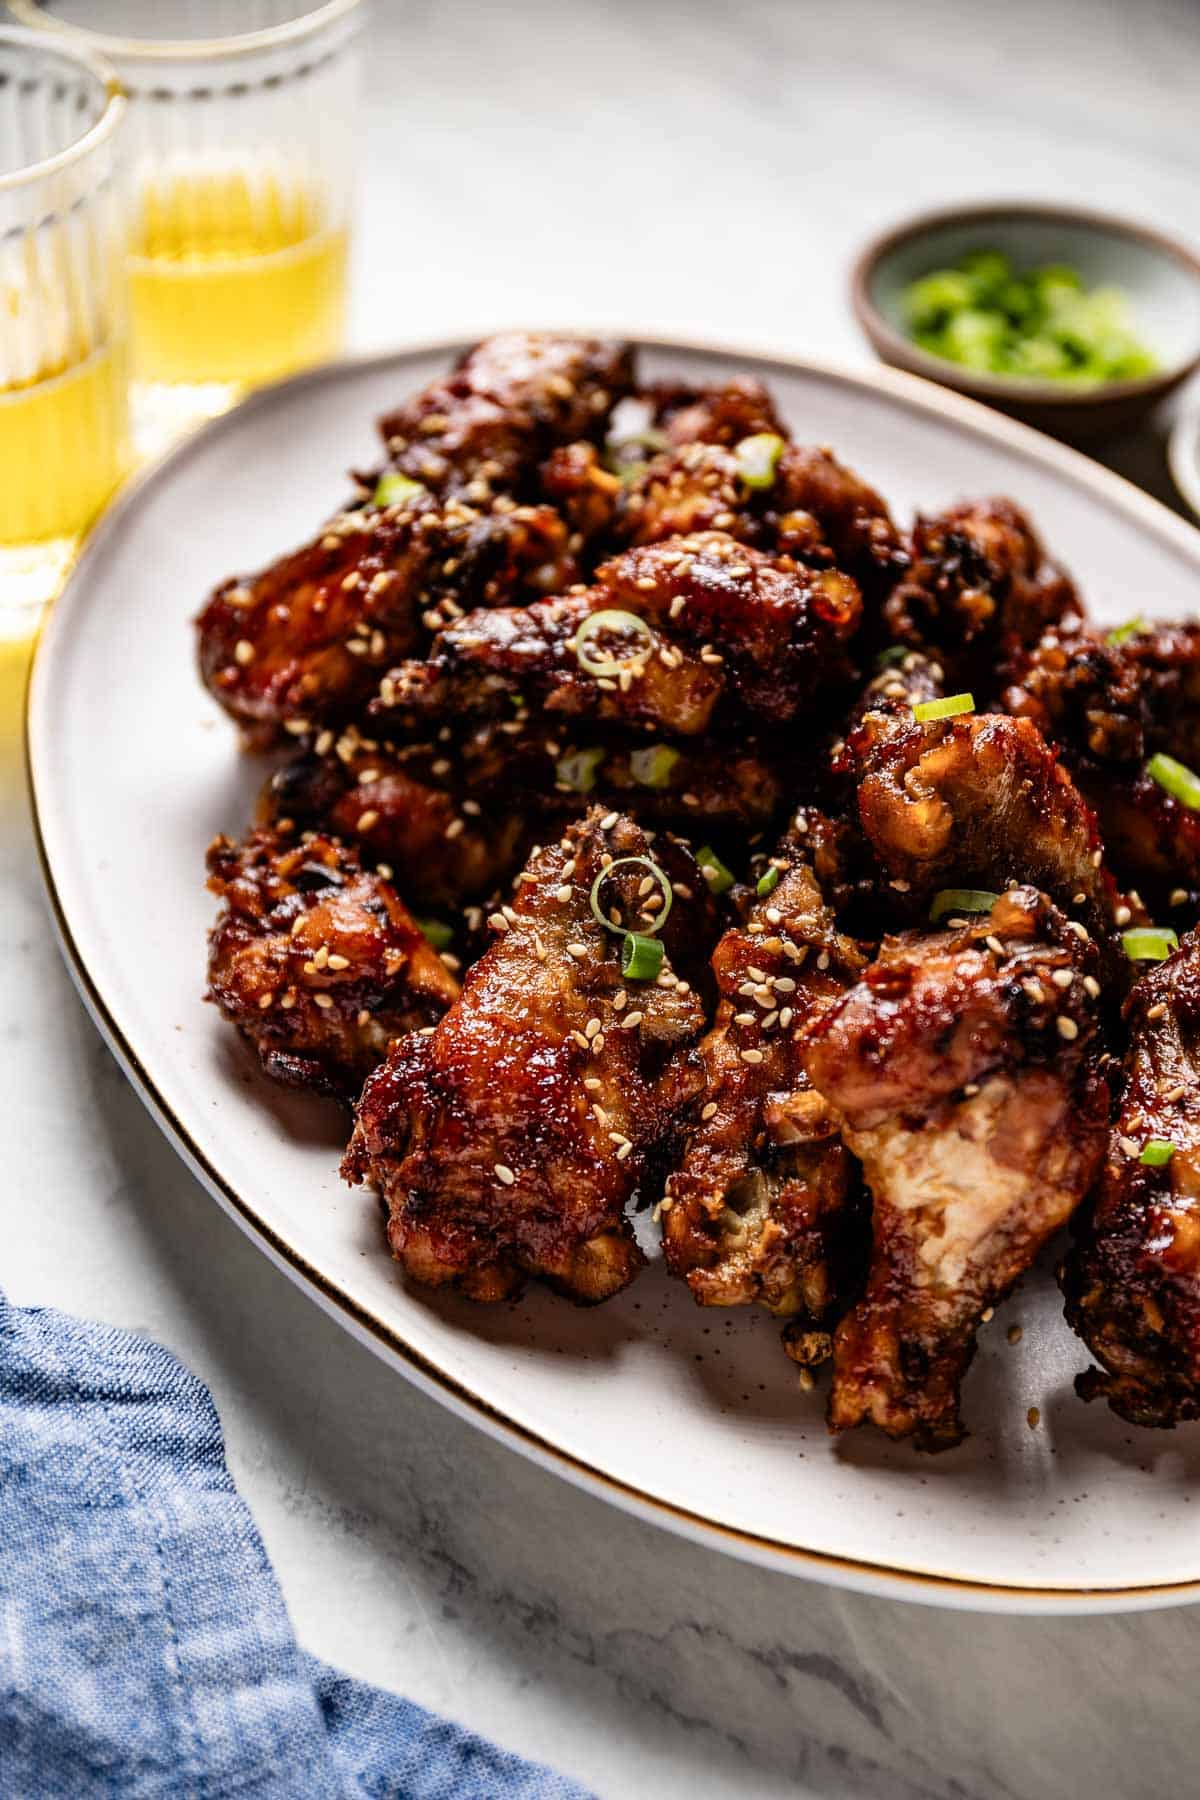 Sticky chicken wings garnished with sesame and green onions on a plate.